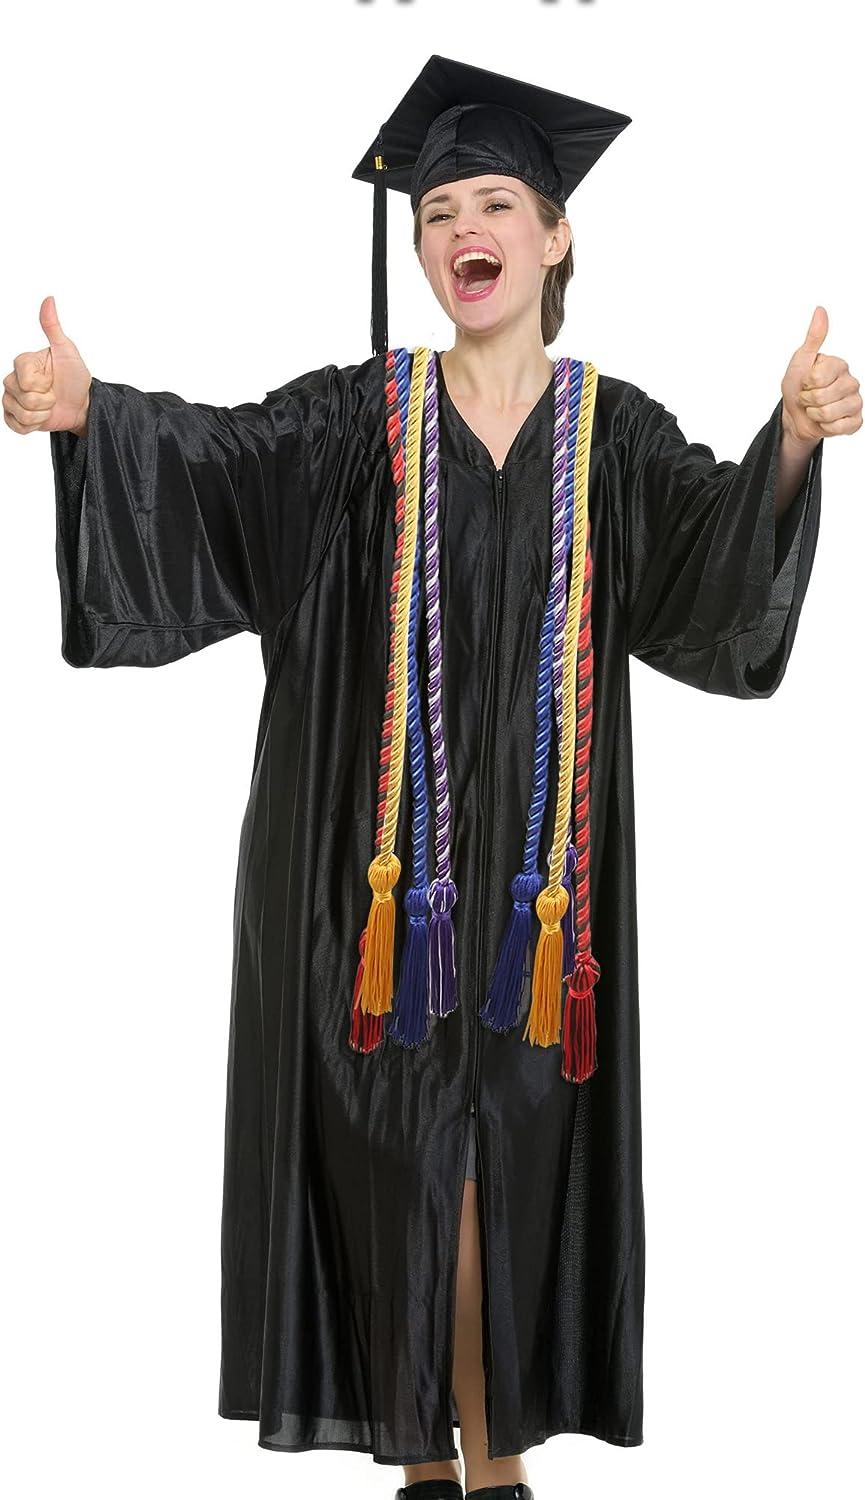 About: Cords for Graduation – What do they mean